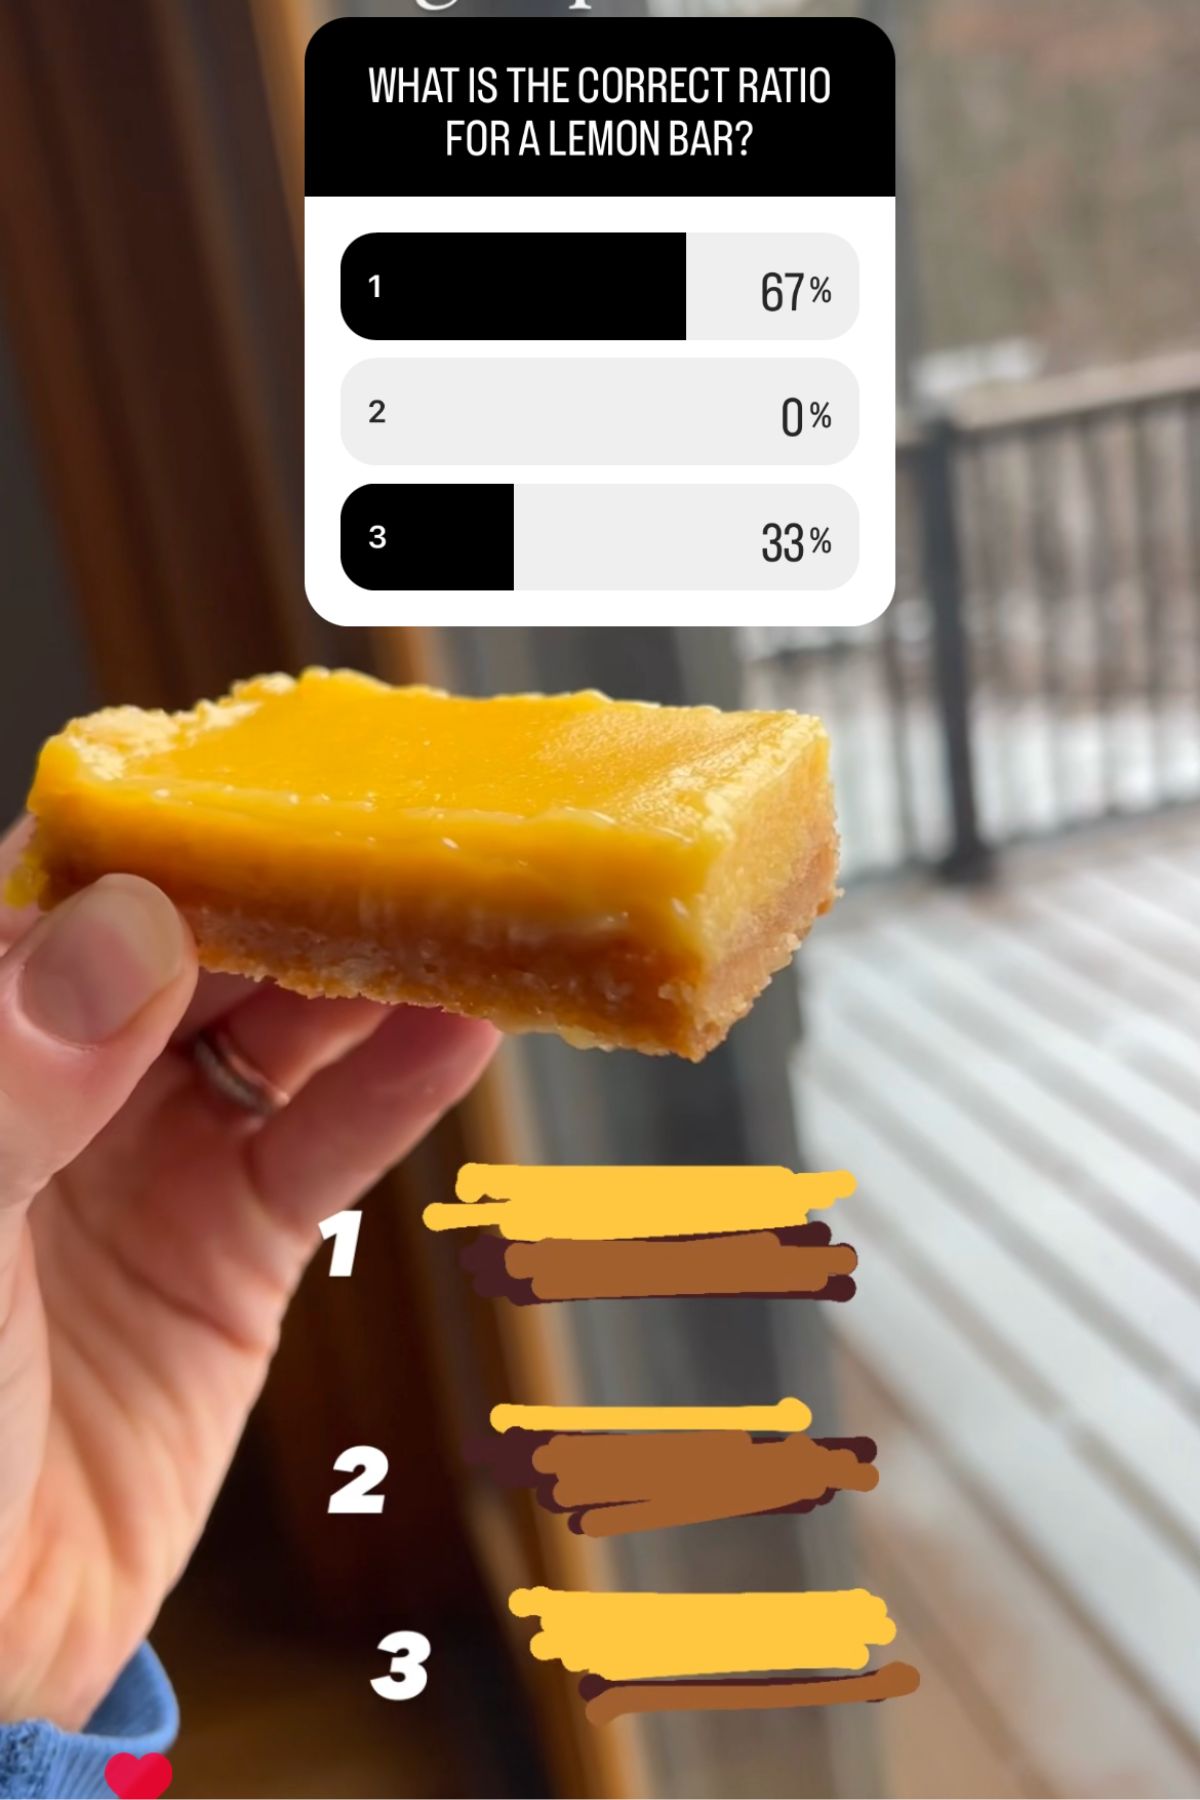 A hand holding a lemon bar with poll results.